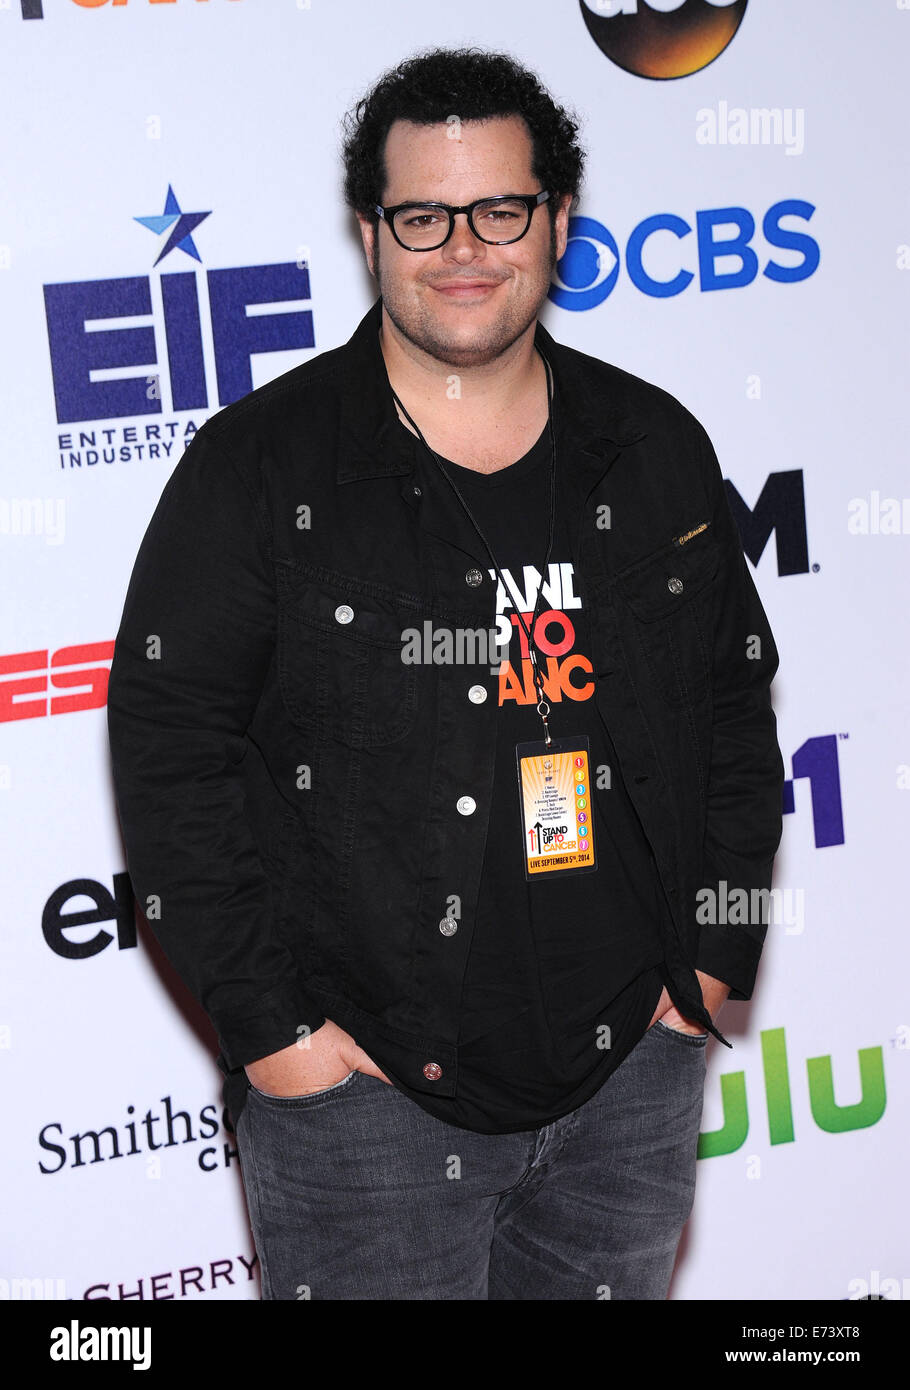 Hollywood, Los Angeles, California, USA. 5th September, 2014. Josh Gad arrives for the 4th Annual 'Stand Up For Cancer' at the Dolby theater. Credit:  Lisa O'Connor/ZUMA Wire/Alamy Live News Stock Photo